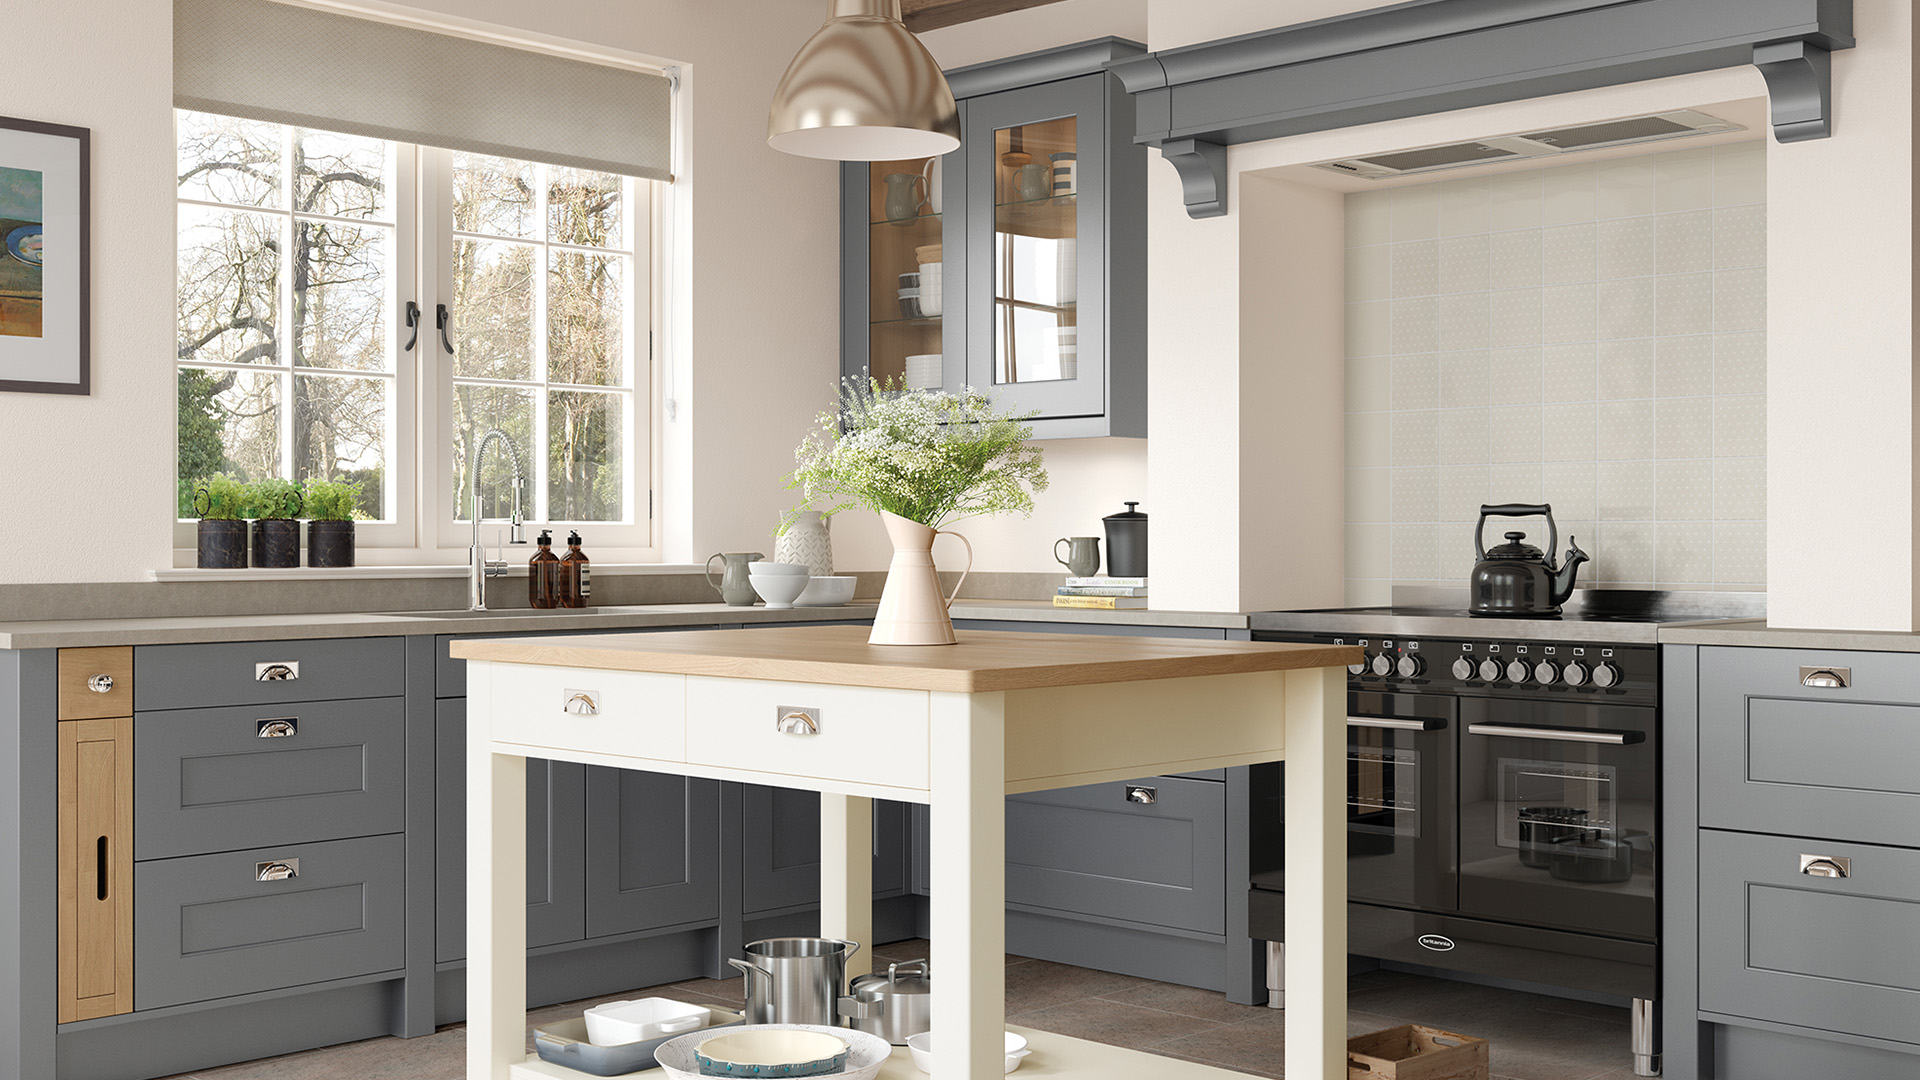 Florence dust grey smooth shaker kitchens blending shaker simplicity with the modernity of a smooth dust grey finish